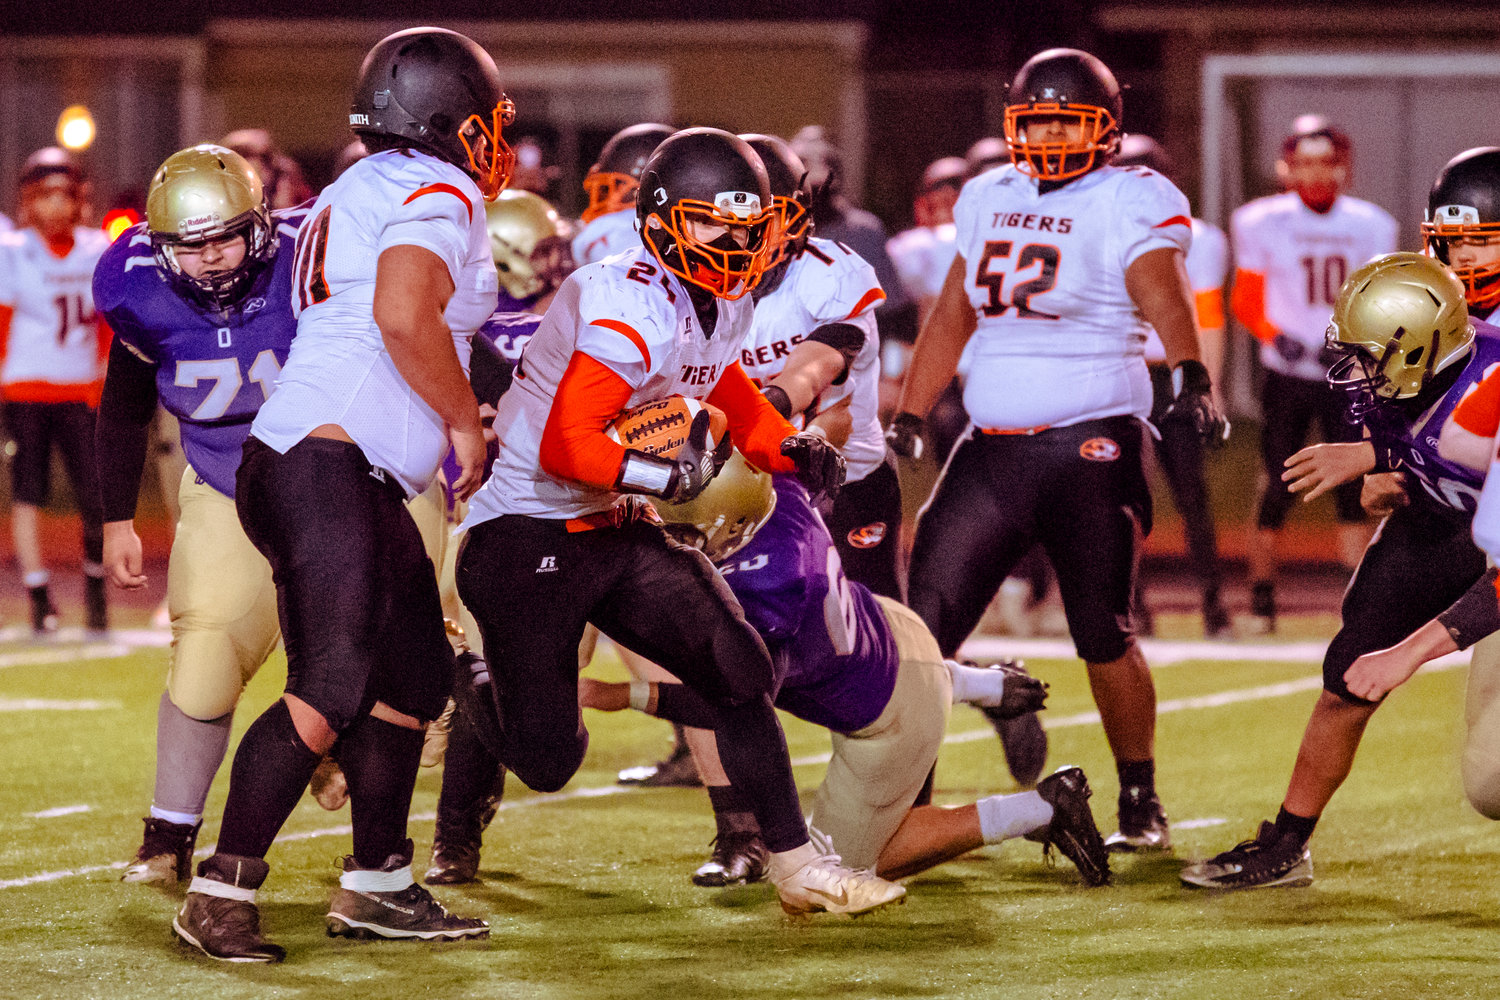 Napavine's Tanner Low (24) runs with the football during a game against Onalaska Saturday night at Tiger Stadium.